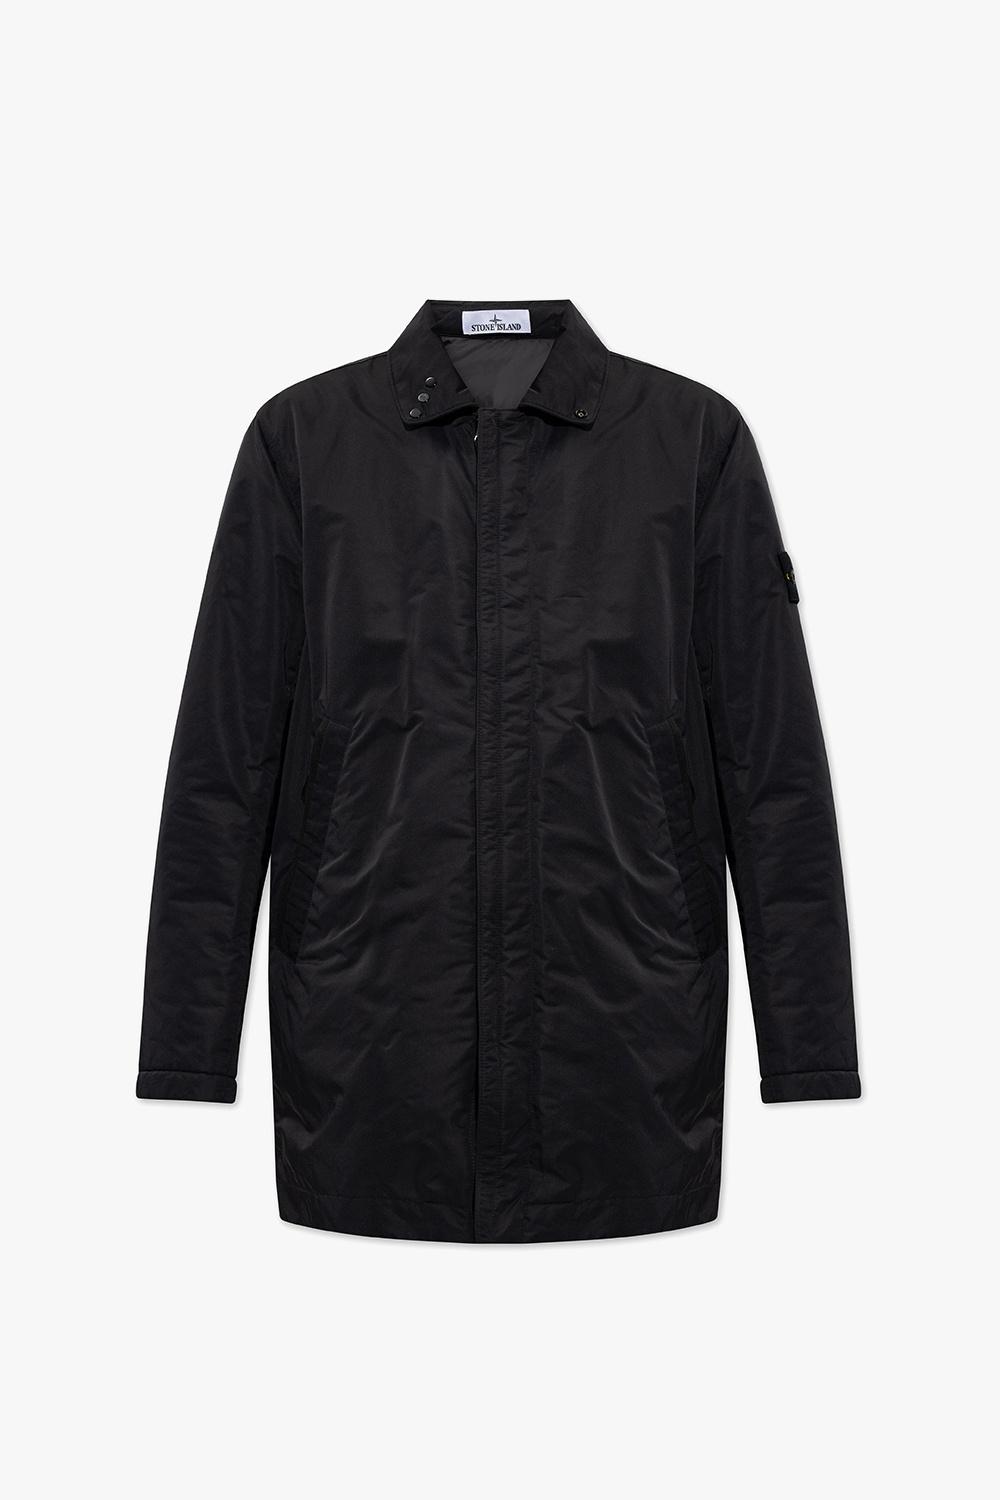 Stone Island Jacket With Logo Patch in Black for Men | Lyst